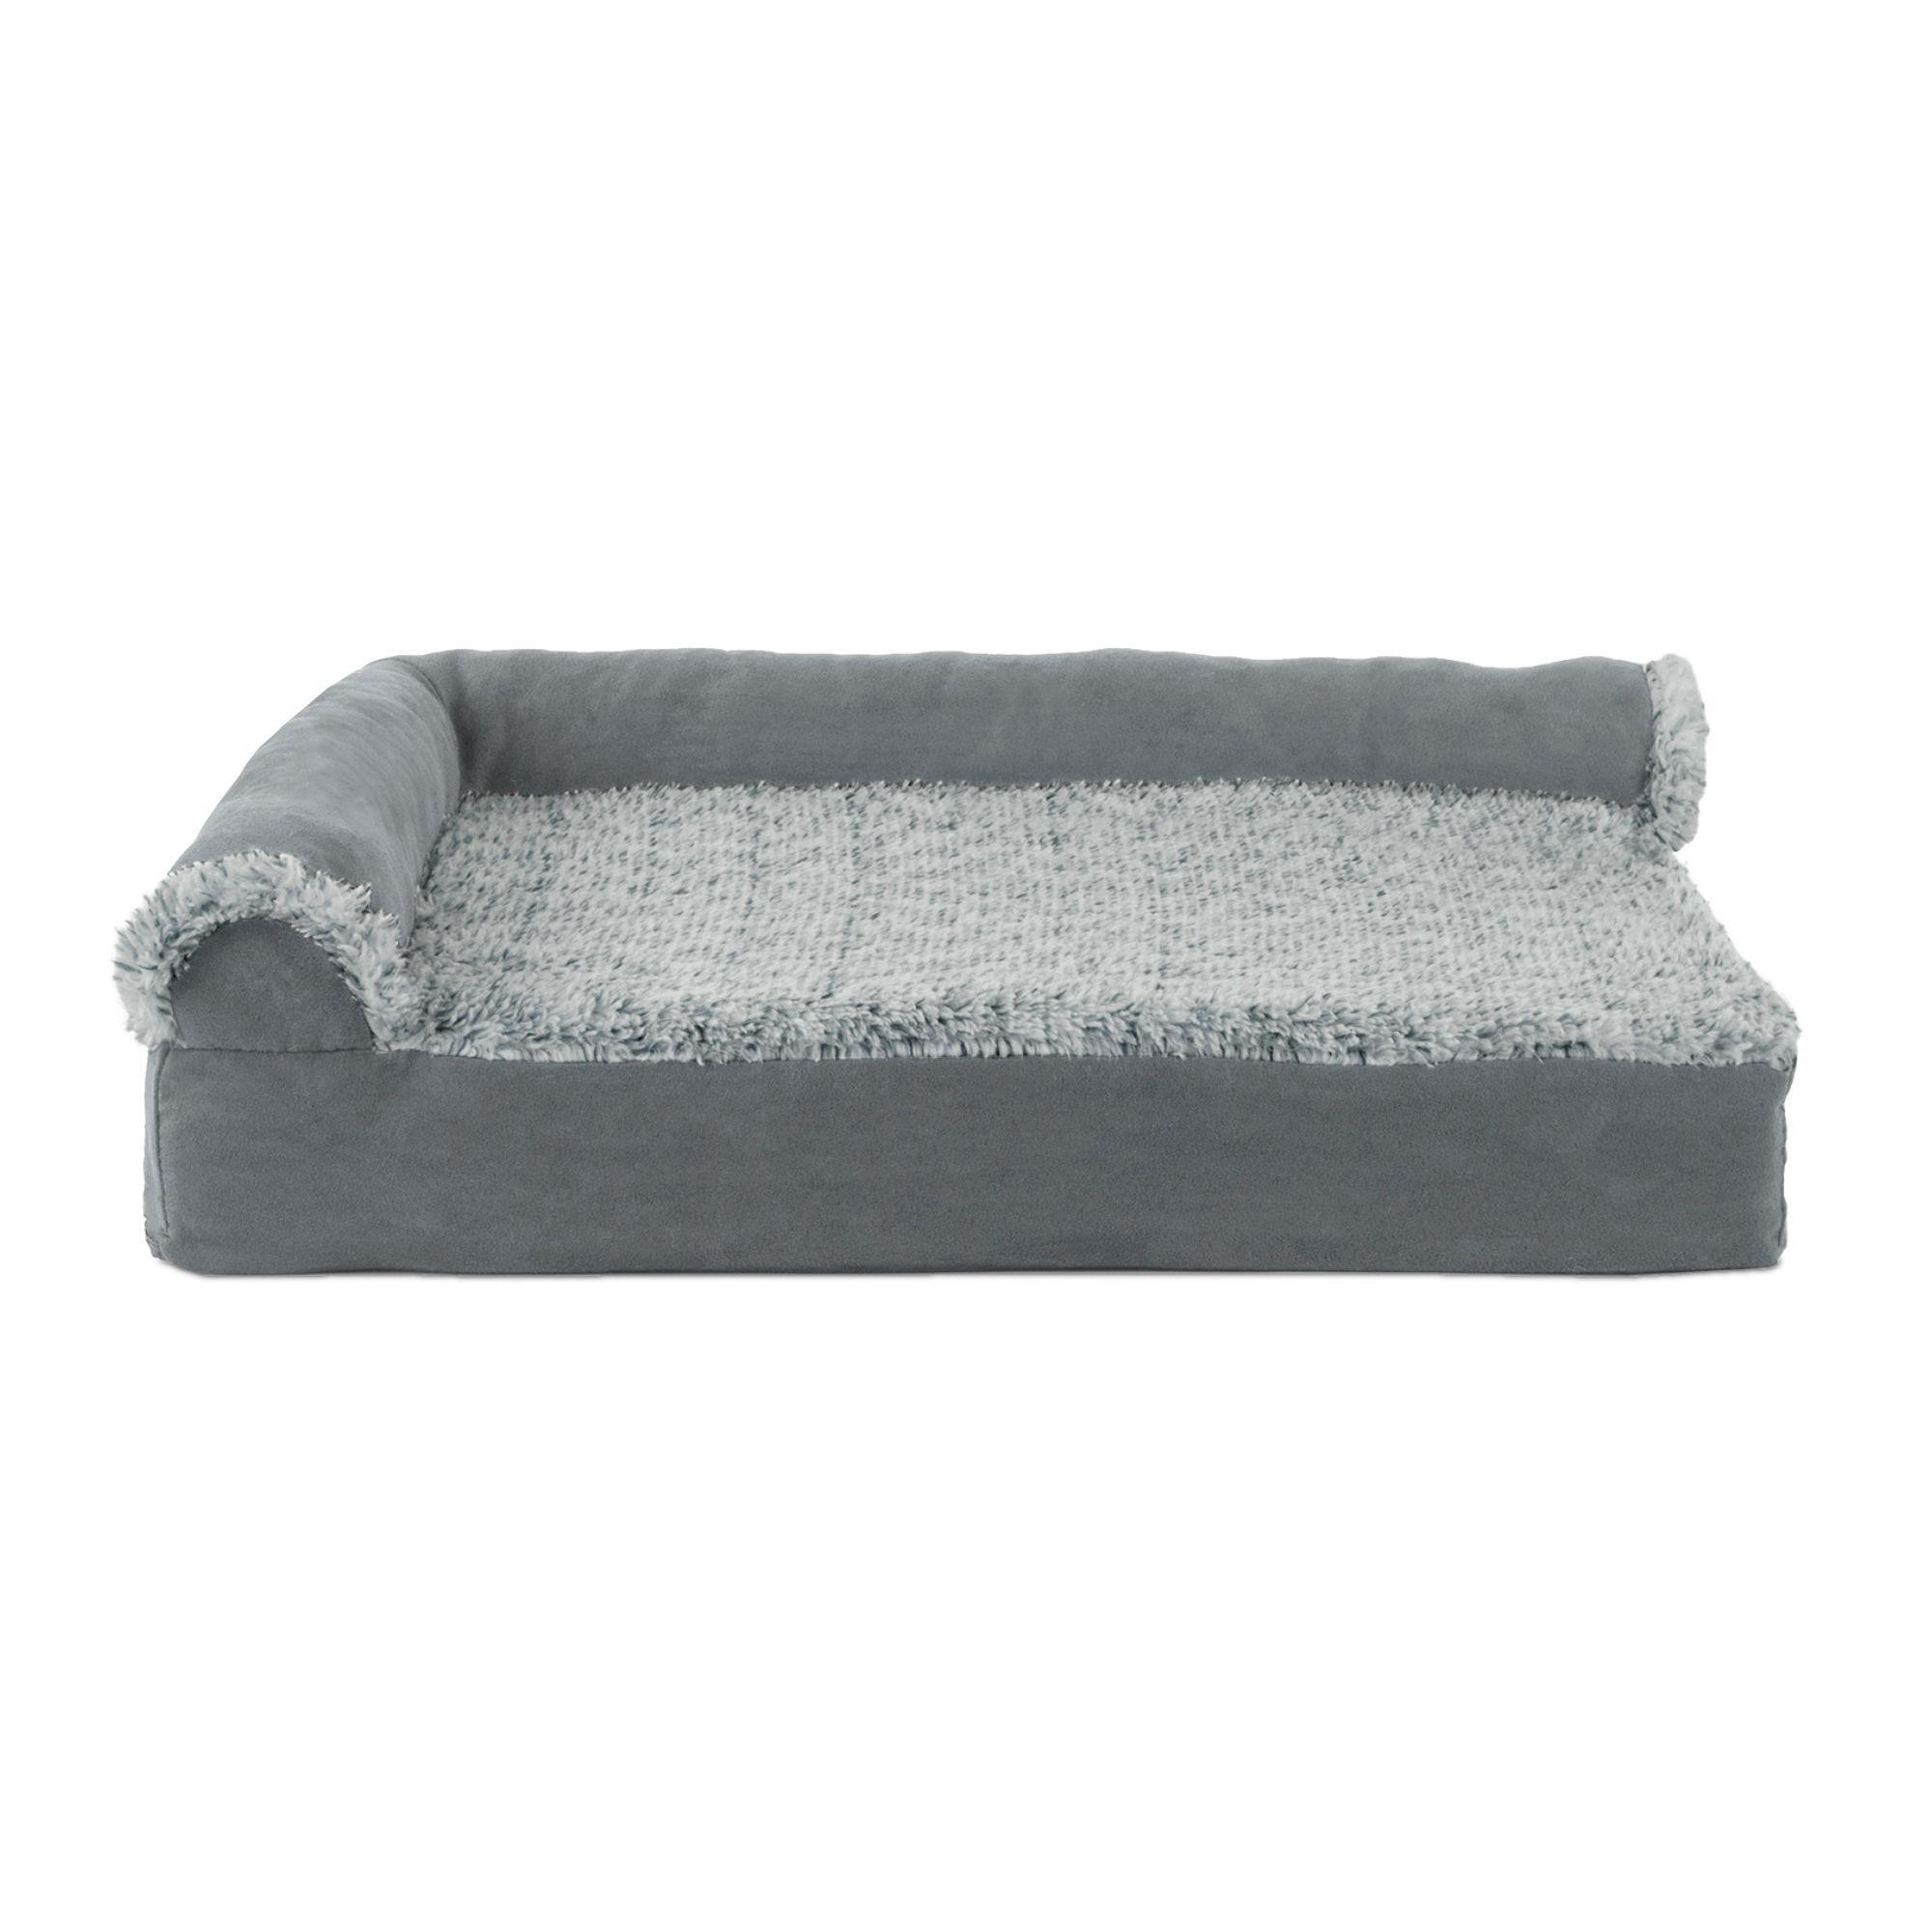 FurHaven Two-Tone Faux Fur & Suede Deluxe Chaise Lounge Memory Top Pet Bed - Stone Gray